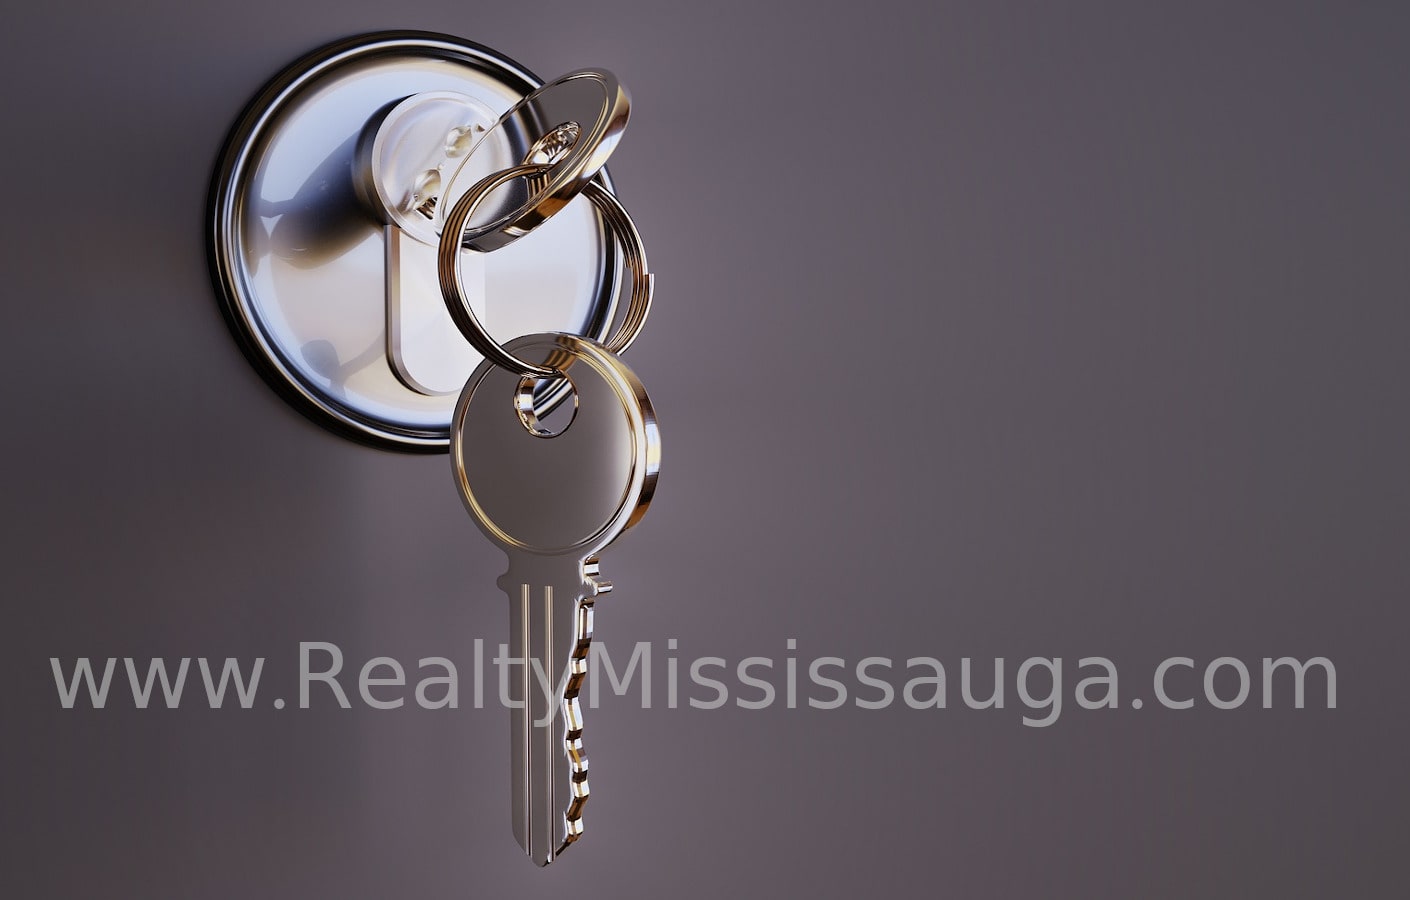 You are currently viewing How to choose security as a service provider in Mississauga